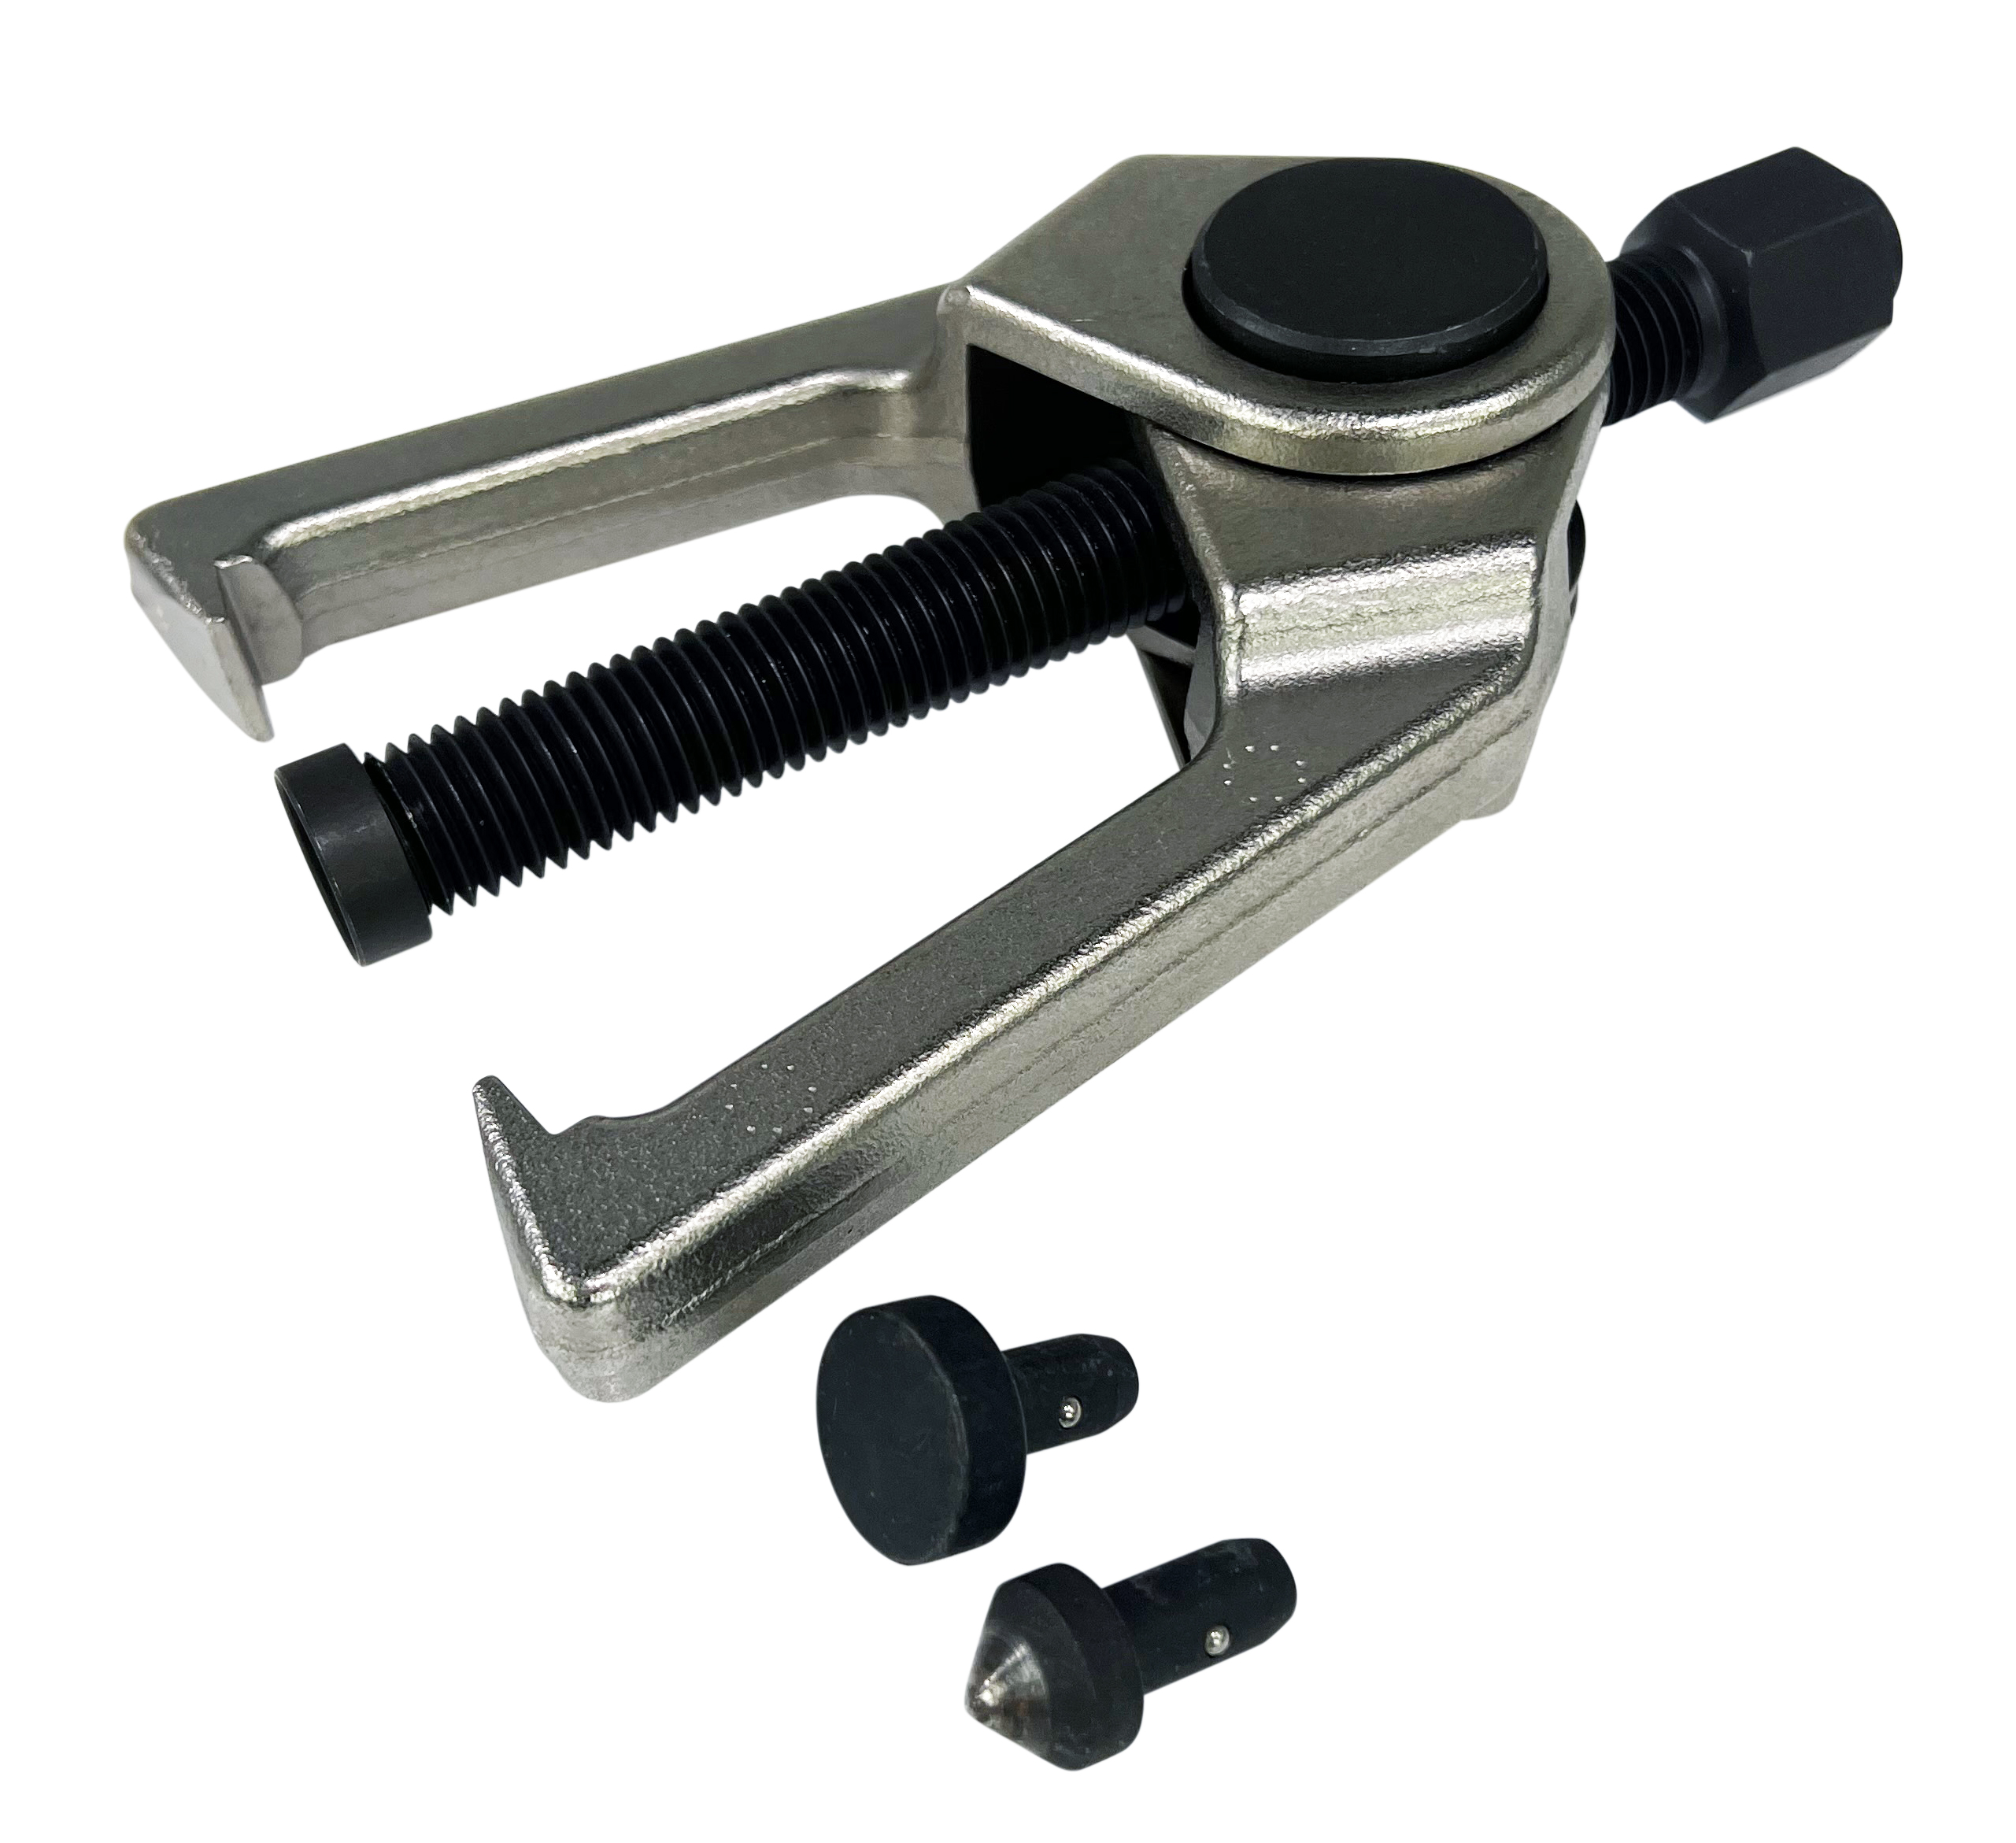 Tie Rod End Removal TOOL that Works 